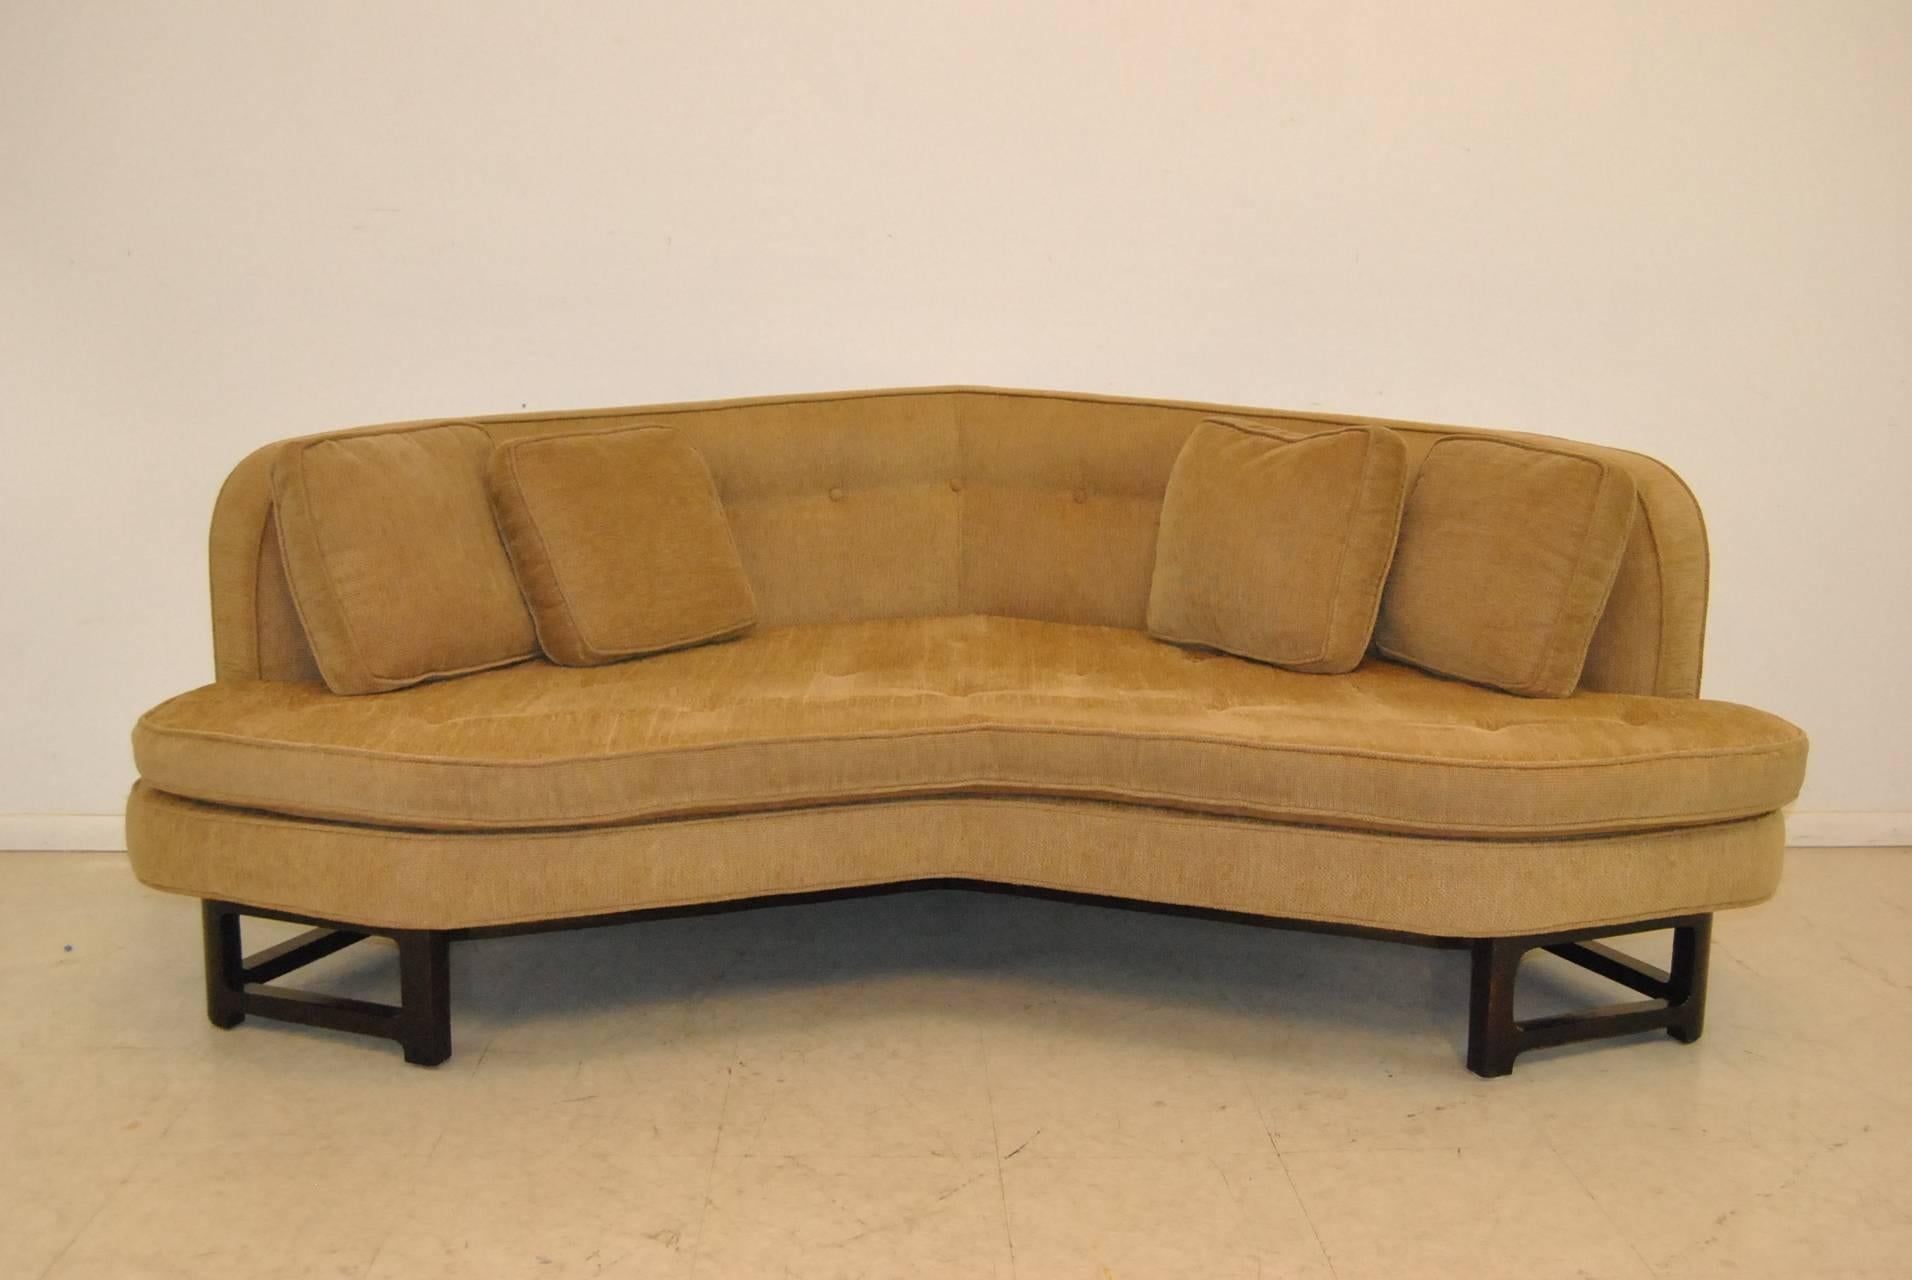 A beautiful Edward Wormley sofa for Dunbar from the Janus Collection, circa 1960s. This fantastic sofa is angled for comfortable conversation. It is attractive from every view. It sits on a very solid dark mahogany frame with a very pleasant beige